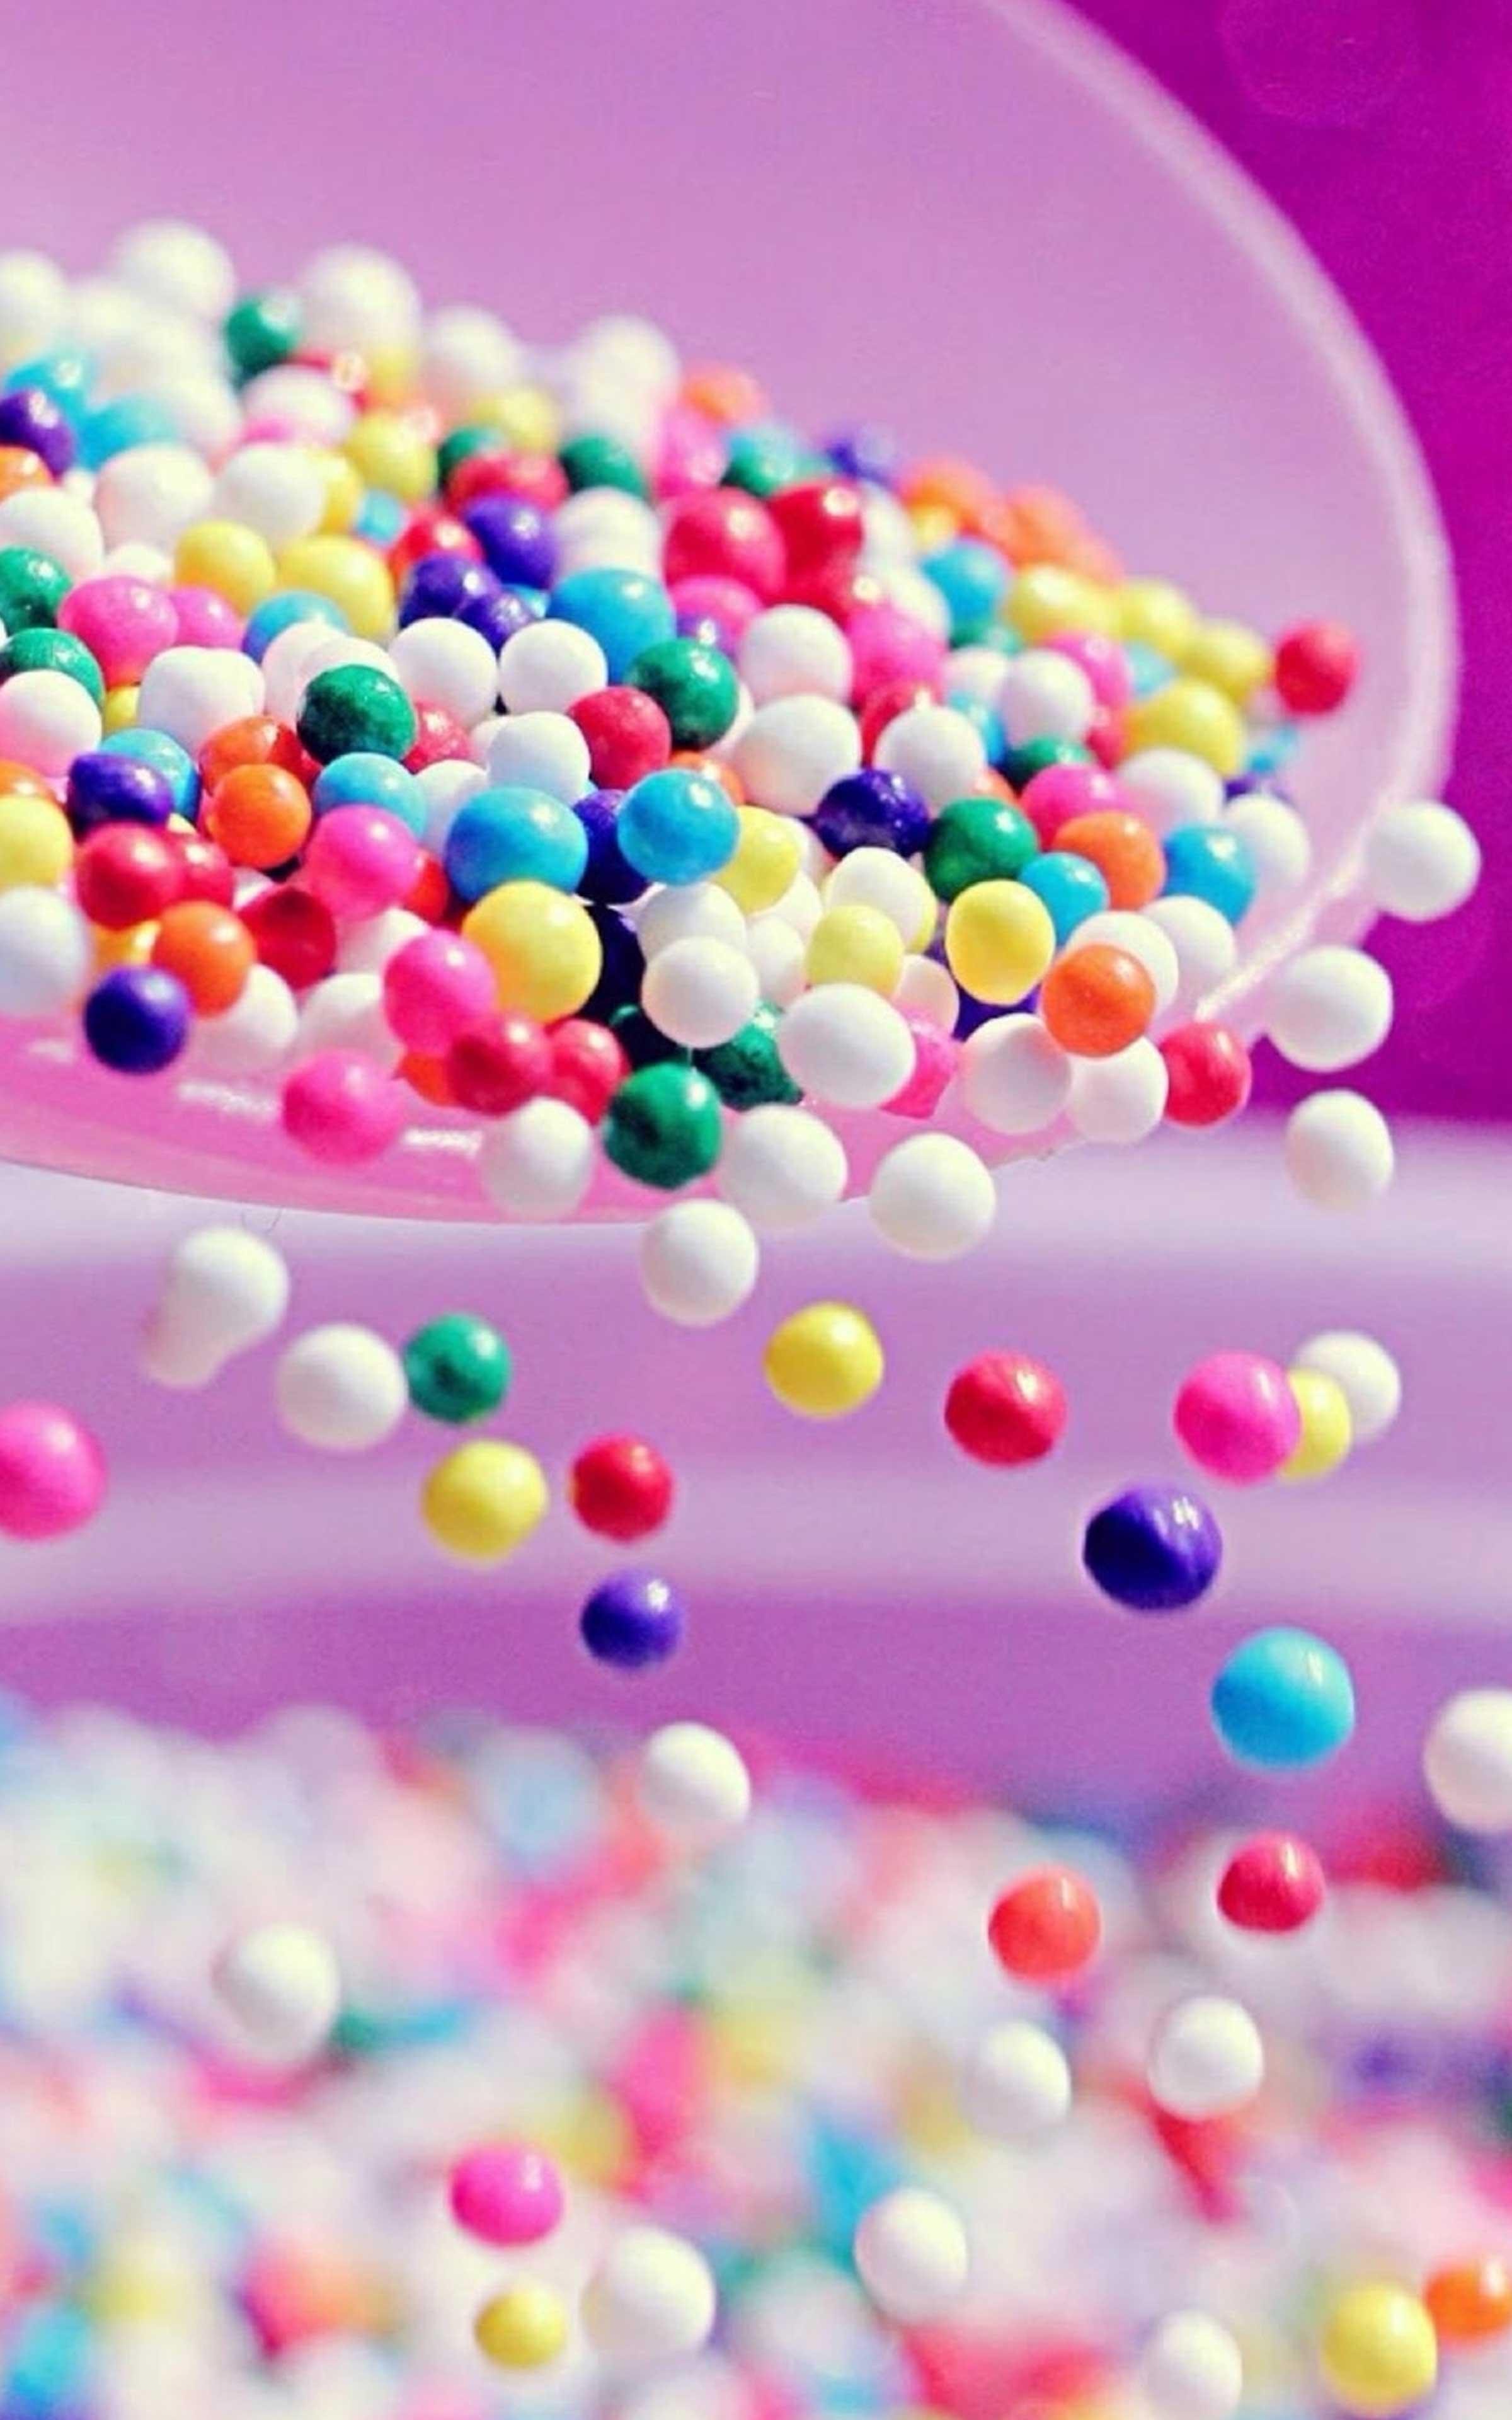 Candy Wallpaper Cool Candy Wallpaper image